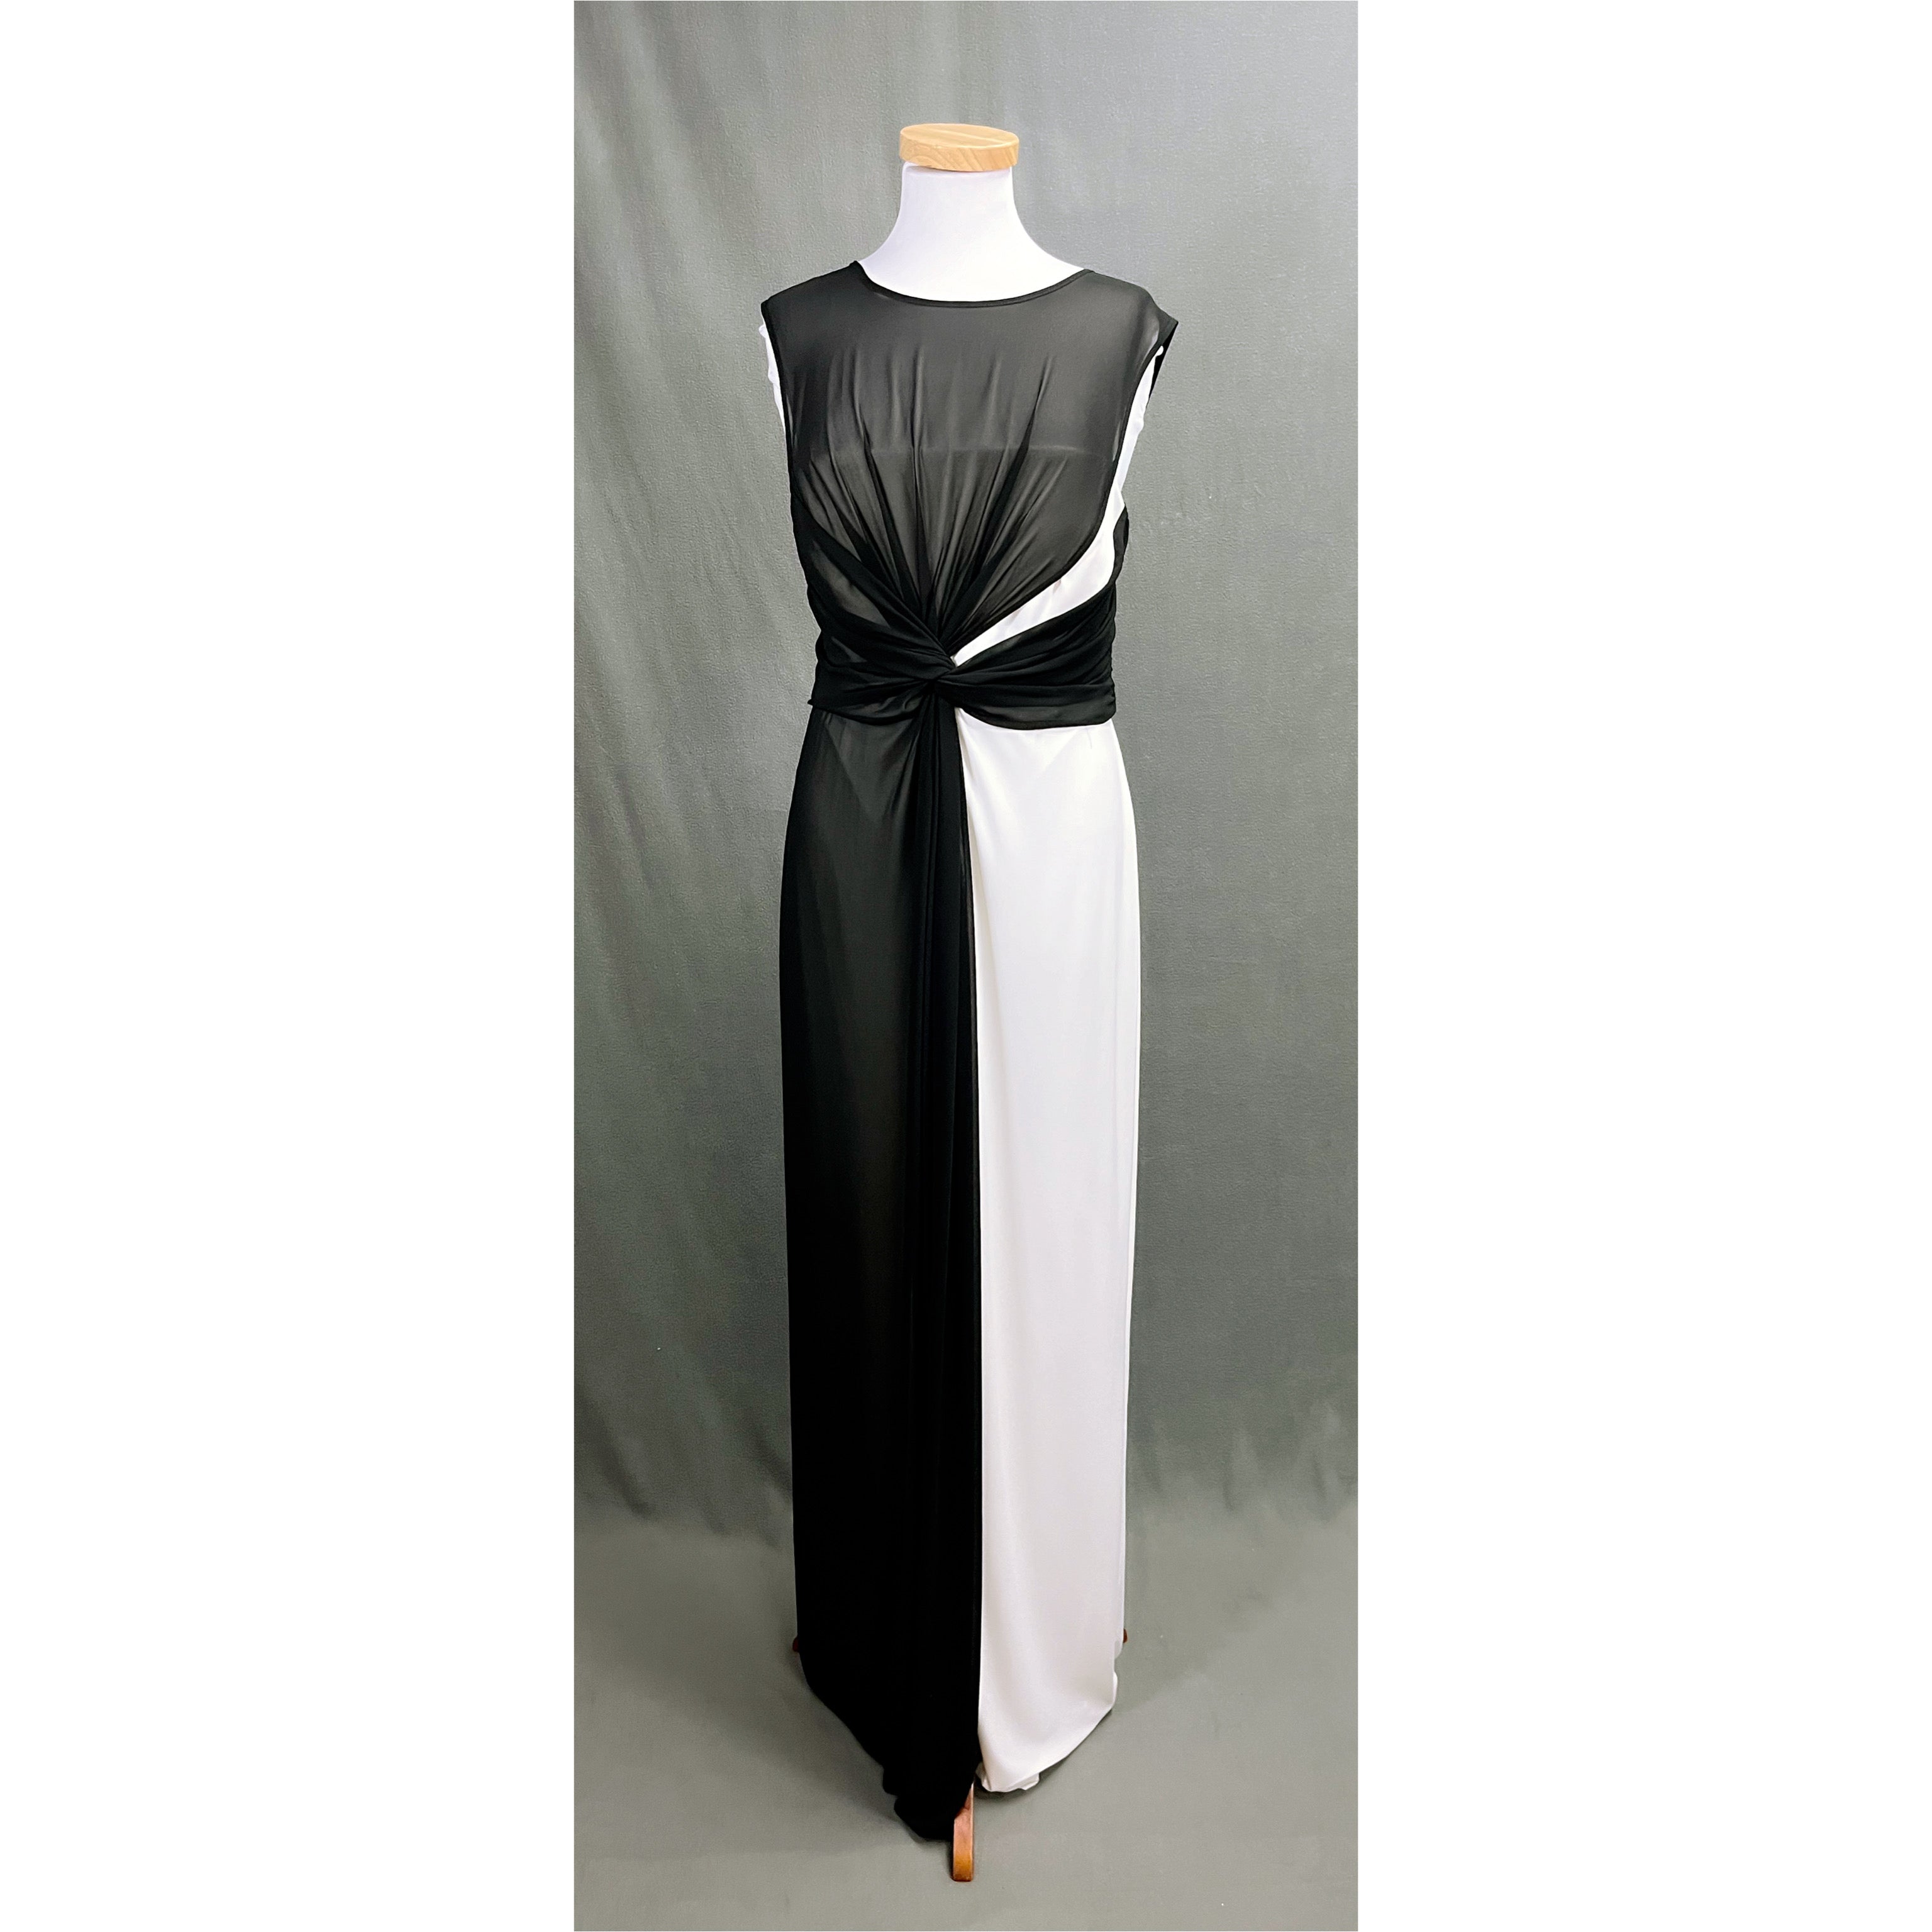 Frank Lyman black and white dress, size 14, NEW WITH TAGS!